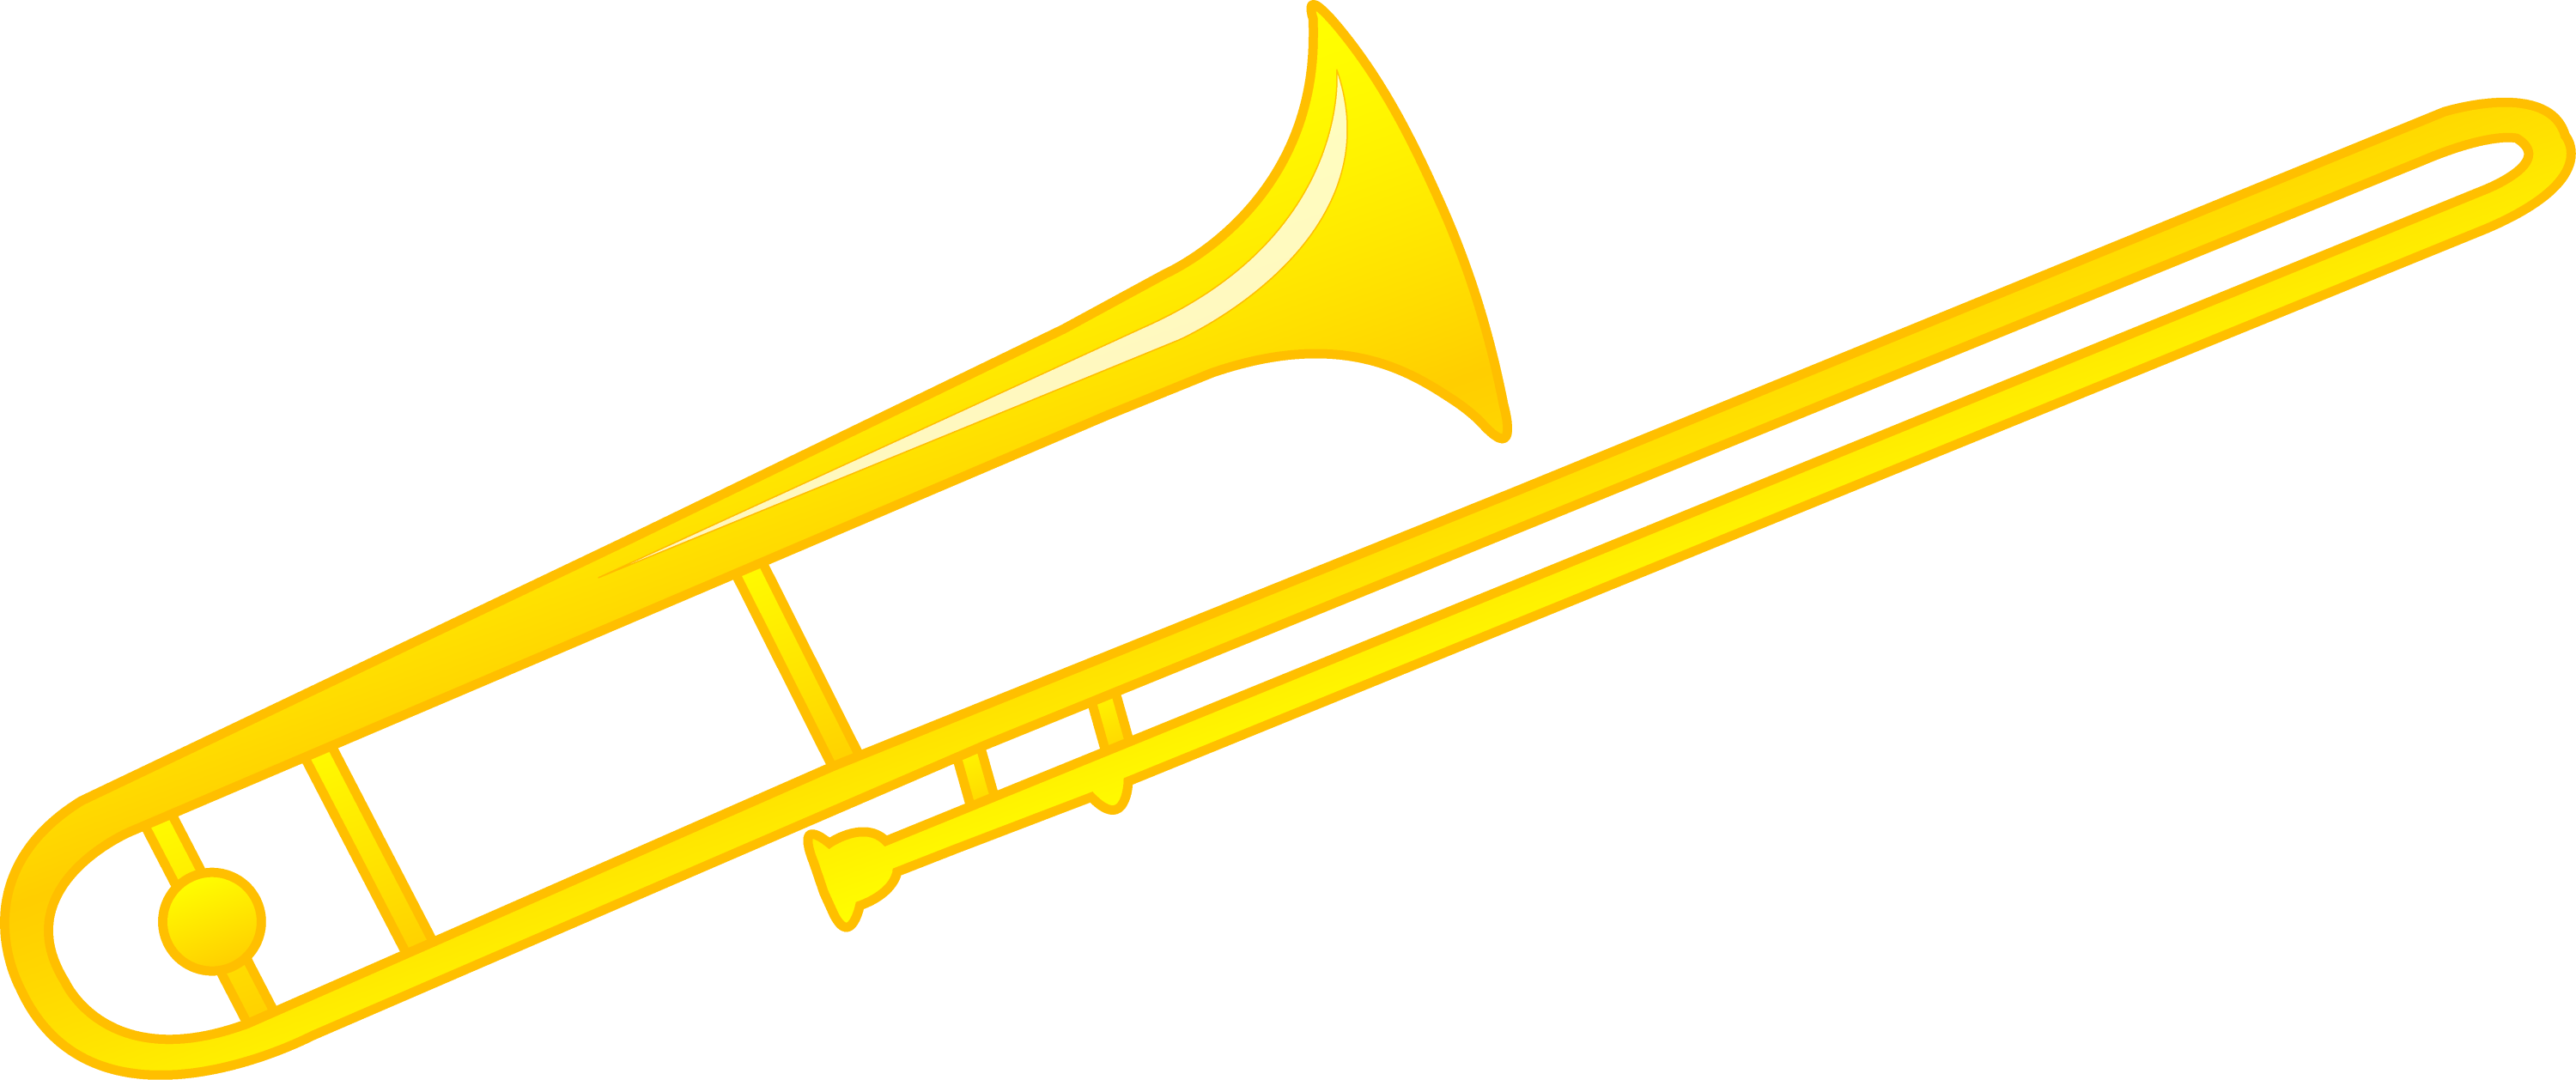 free clipart images musical instruments - photo #14